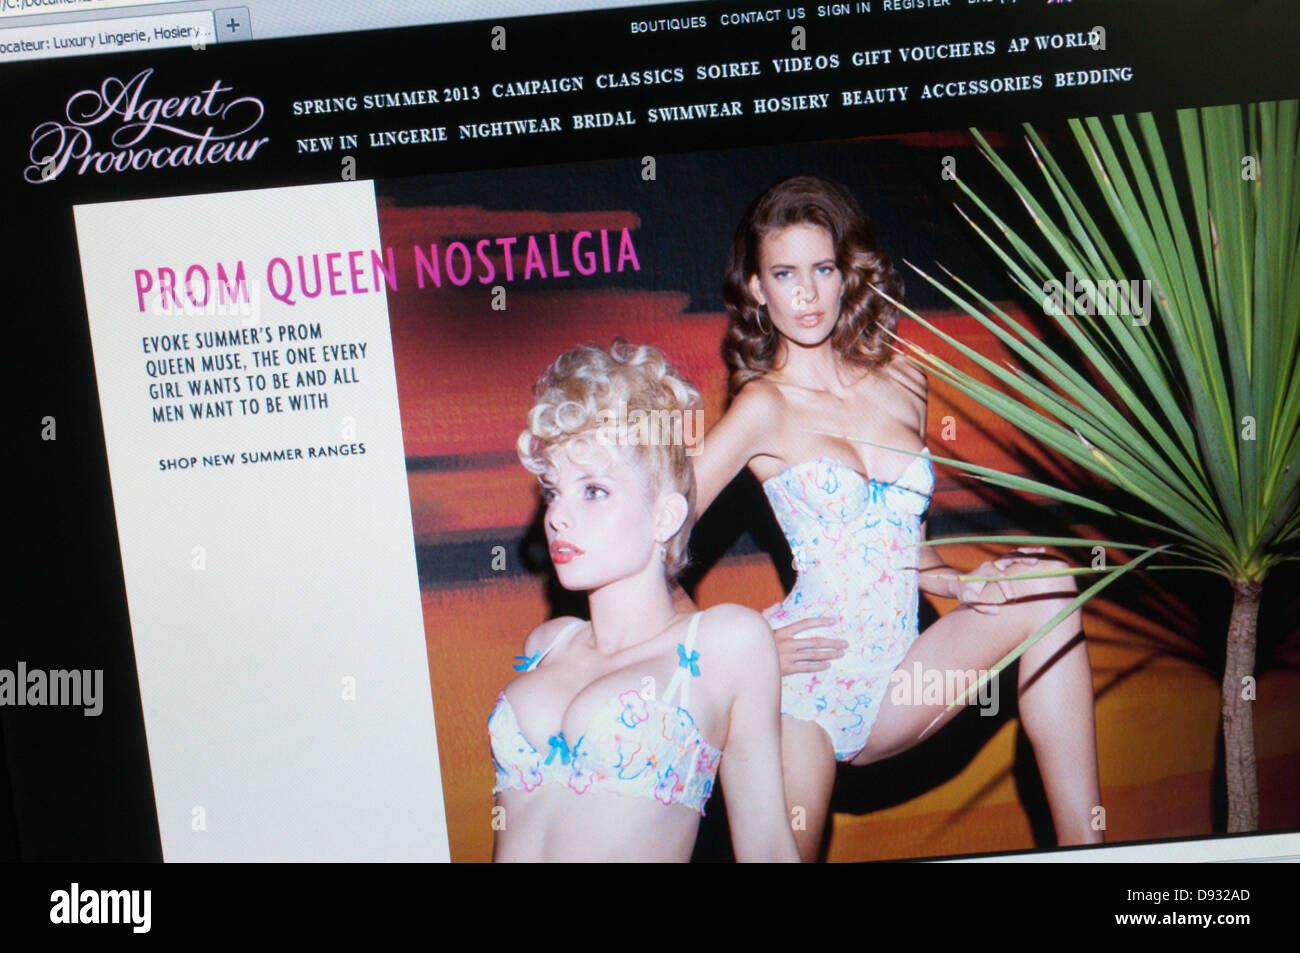 The web site of Agent Provocateur. Stock Photo